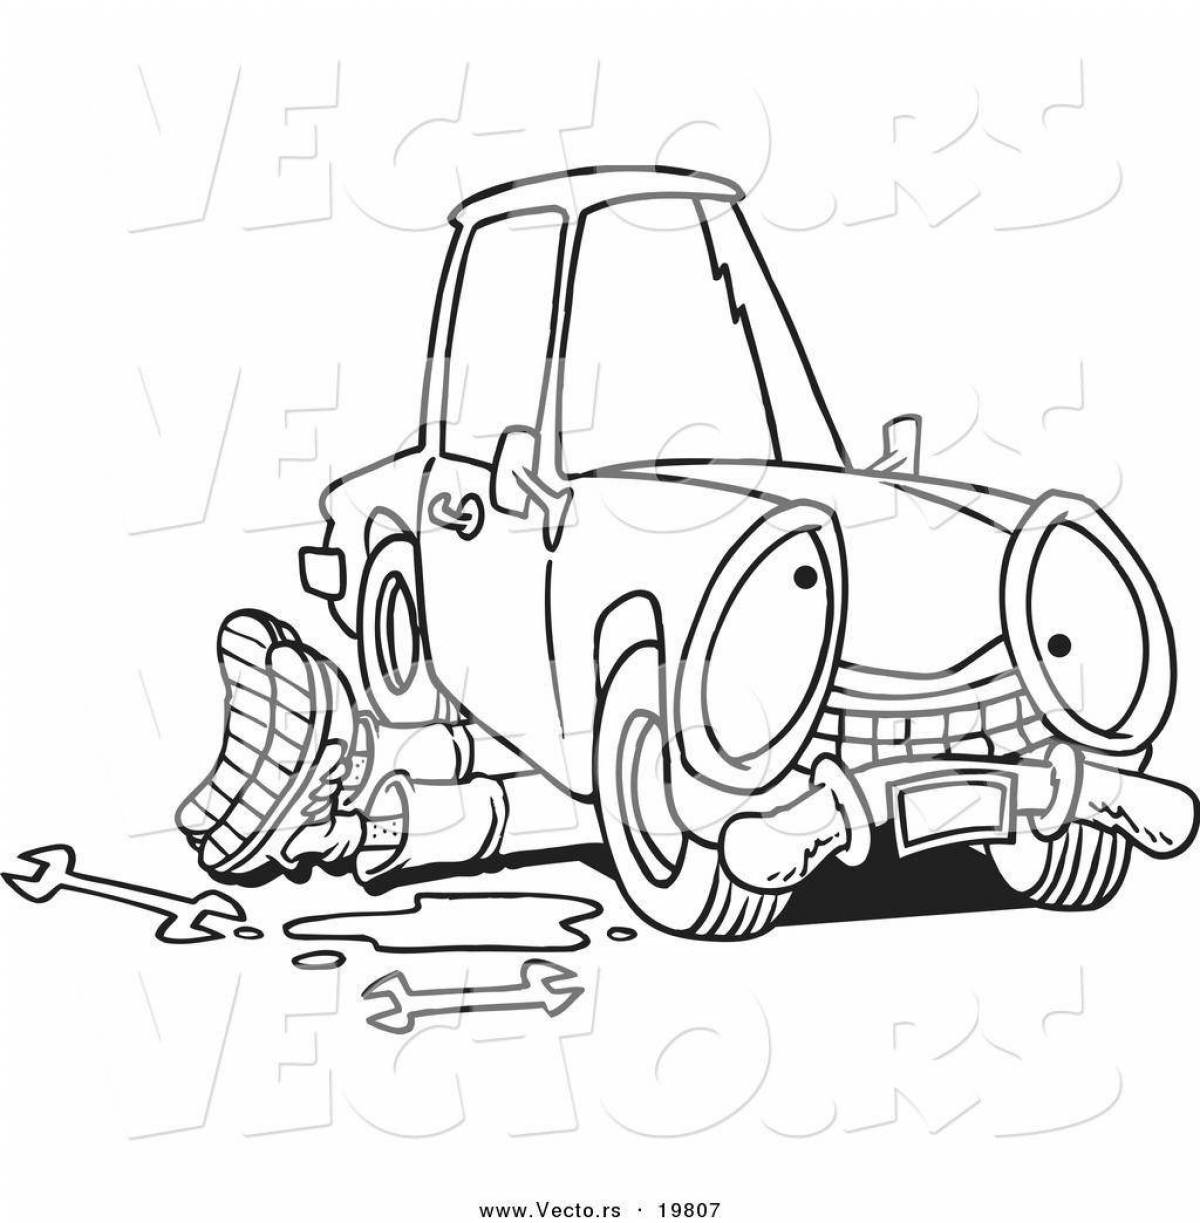 Coloring page of an attractive car mechanic